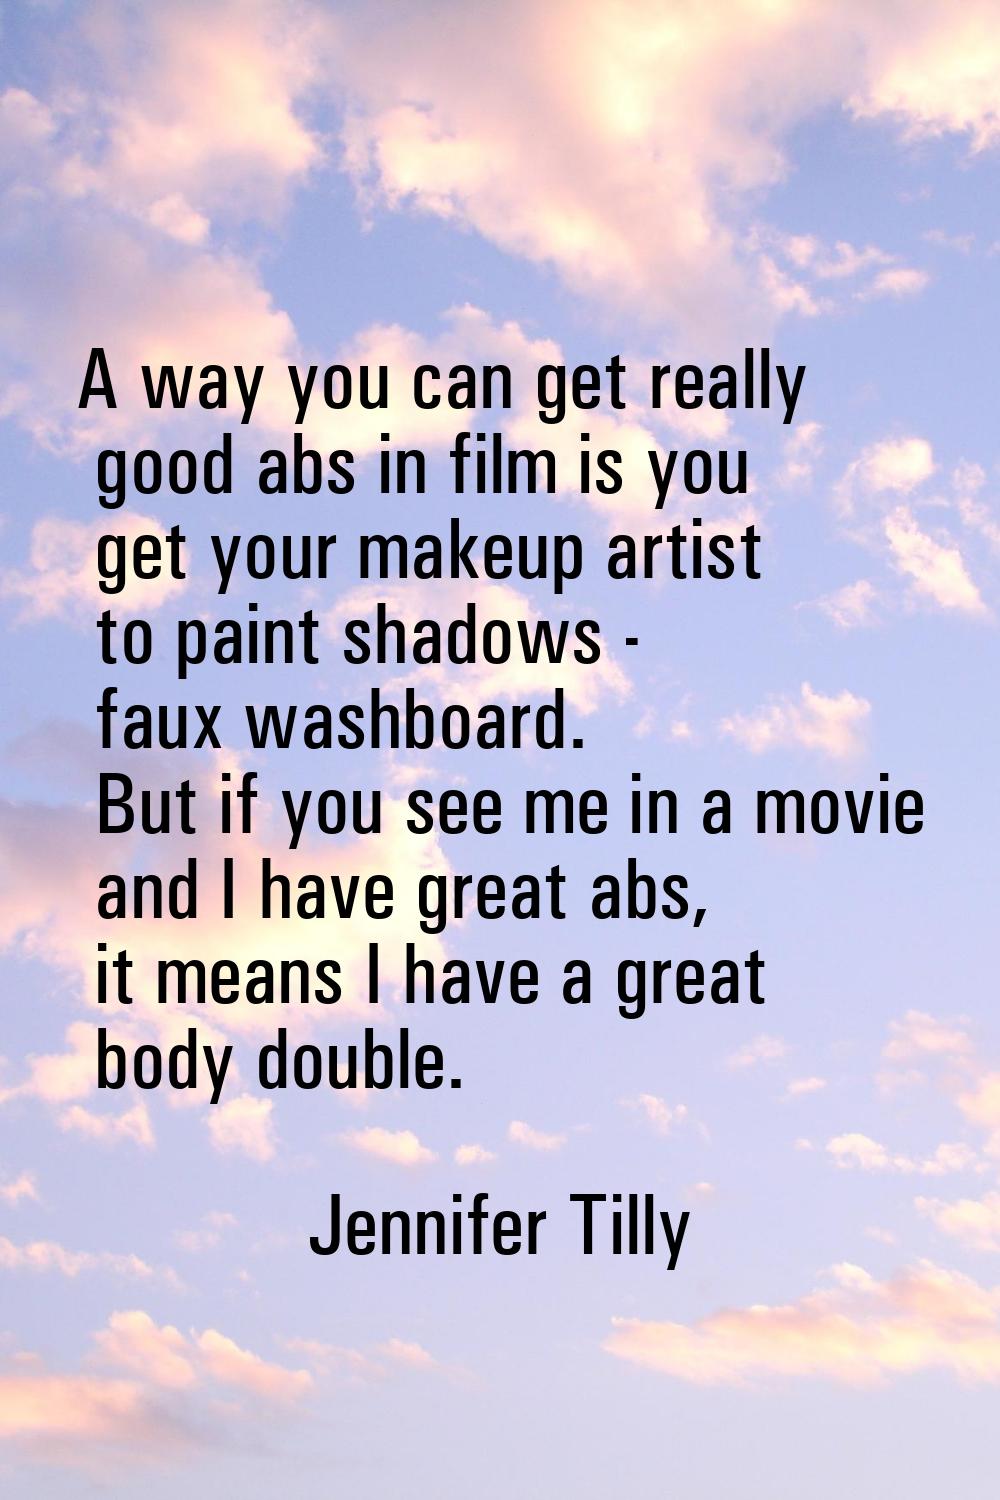 A way you can get really good abs in film is you get your makeup artist to paint shadows - faux was